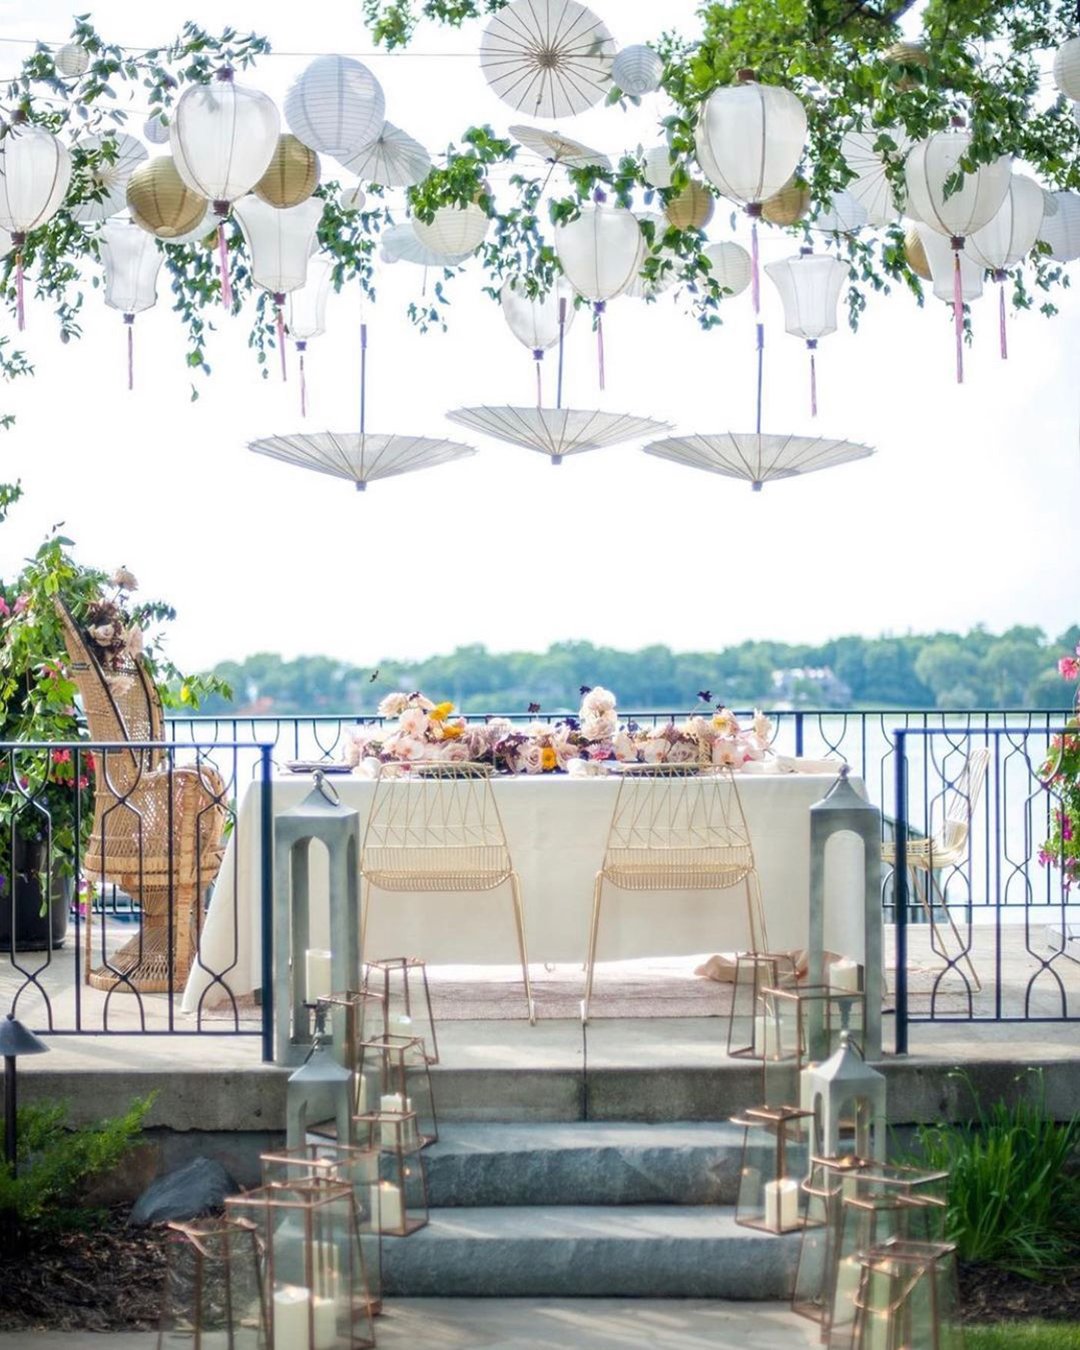 wedding decor ideas hanging umbrellas and lamps above the table at reception liliaflowerboutique